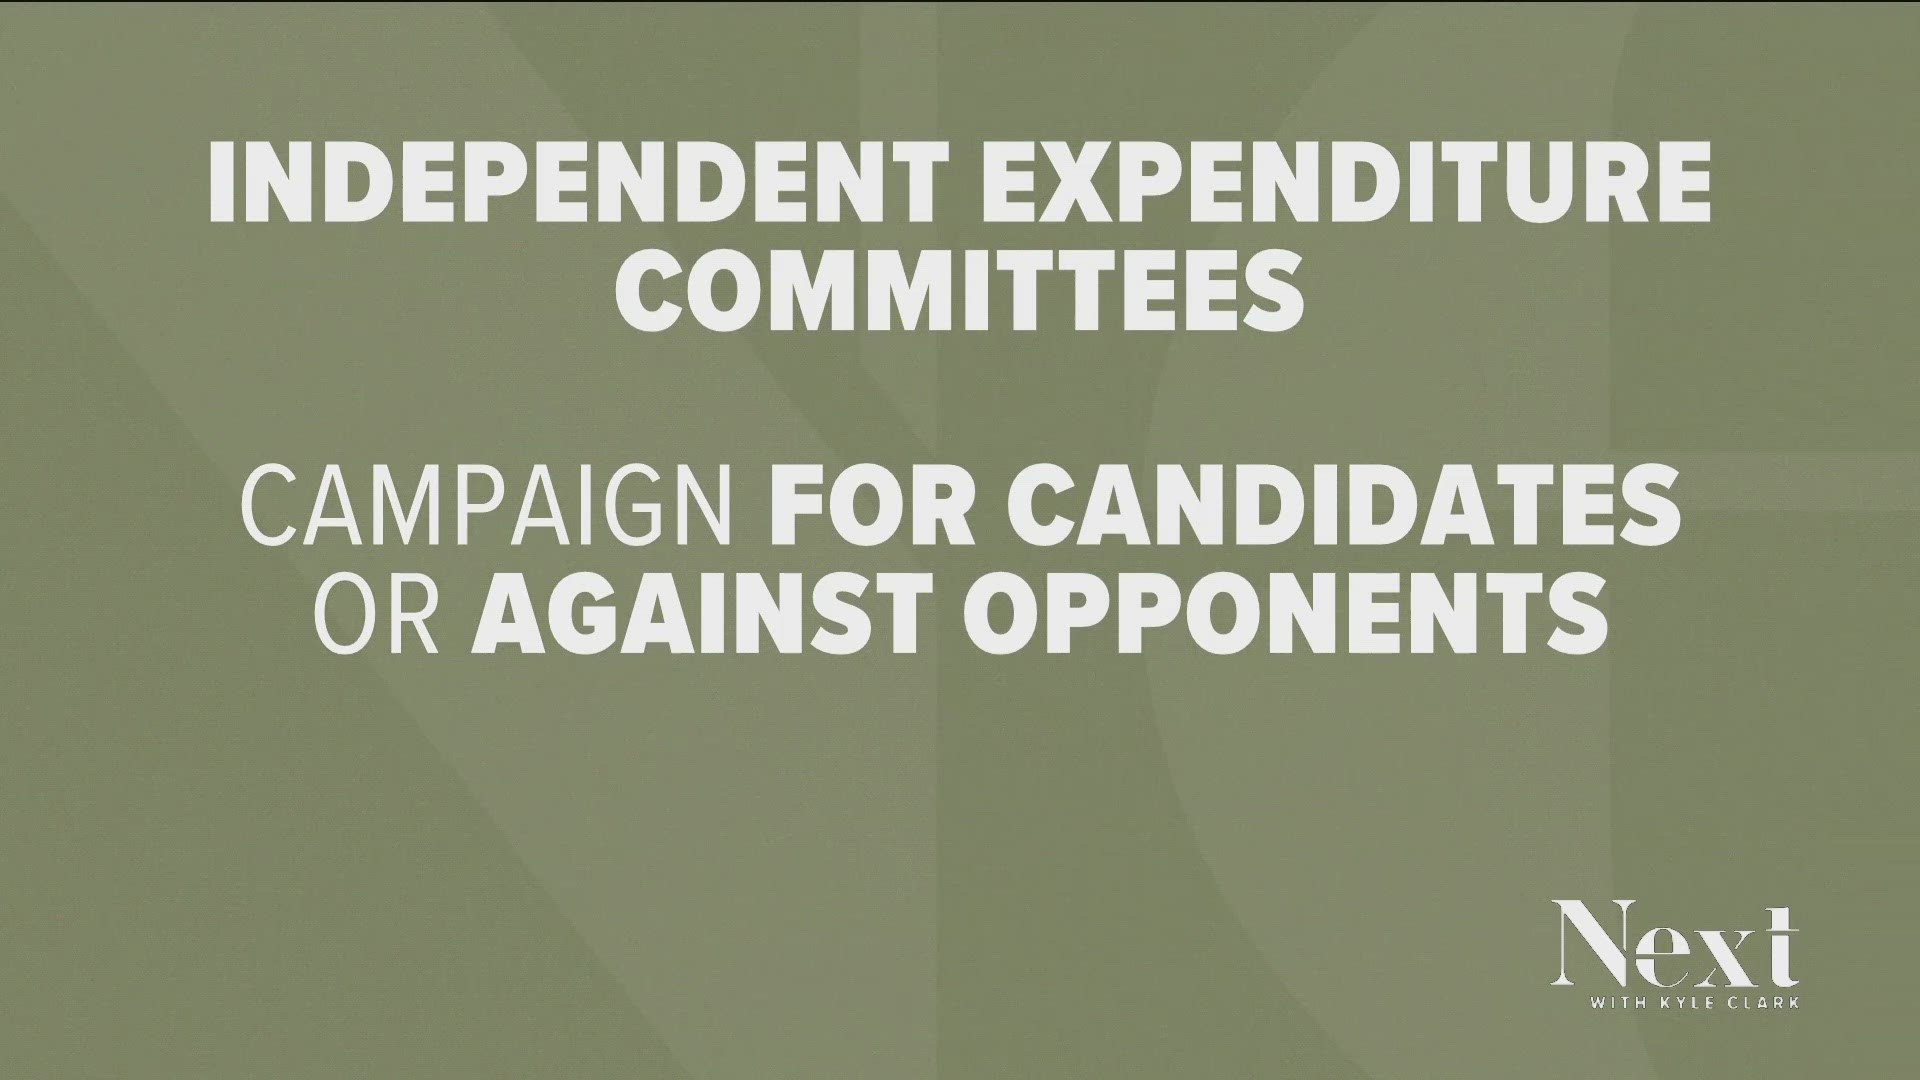 An IEC is a group that campaigns for a candidate or against their opponent, without input from that candidate. And IECs are exempt from contribution limits.